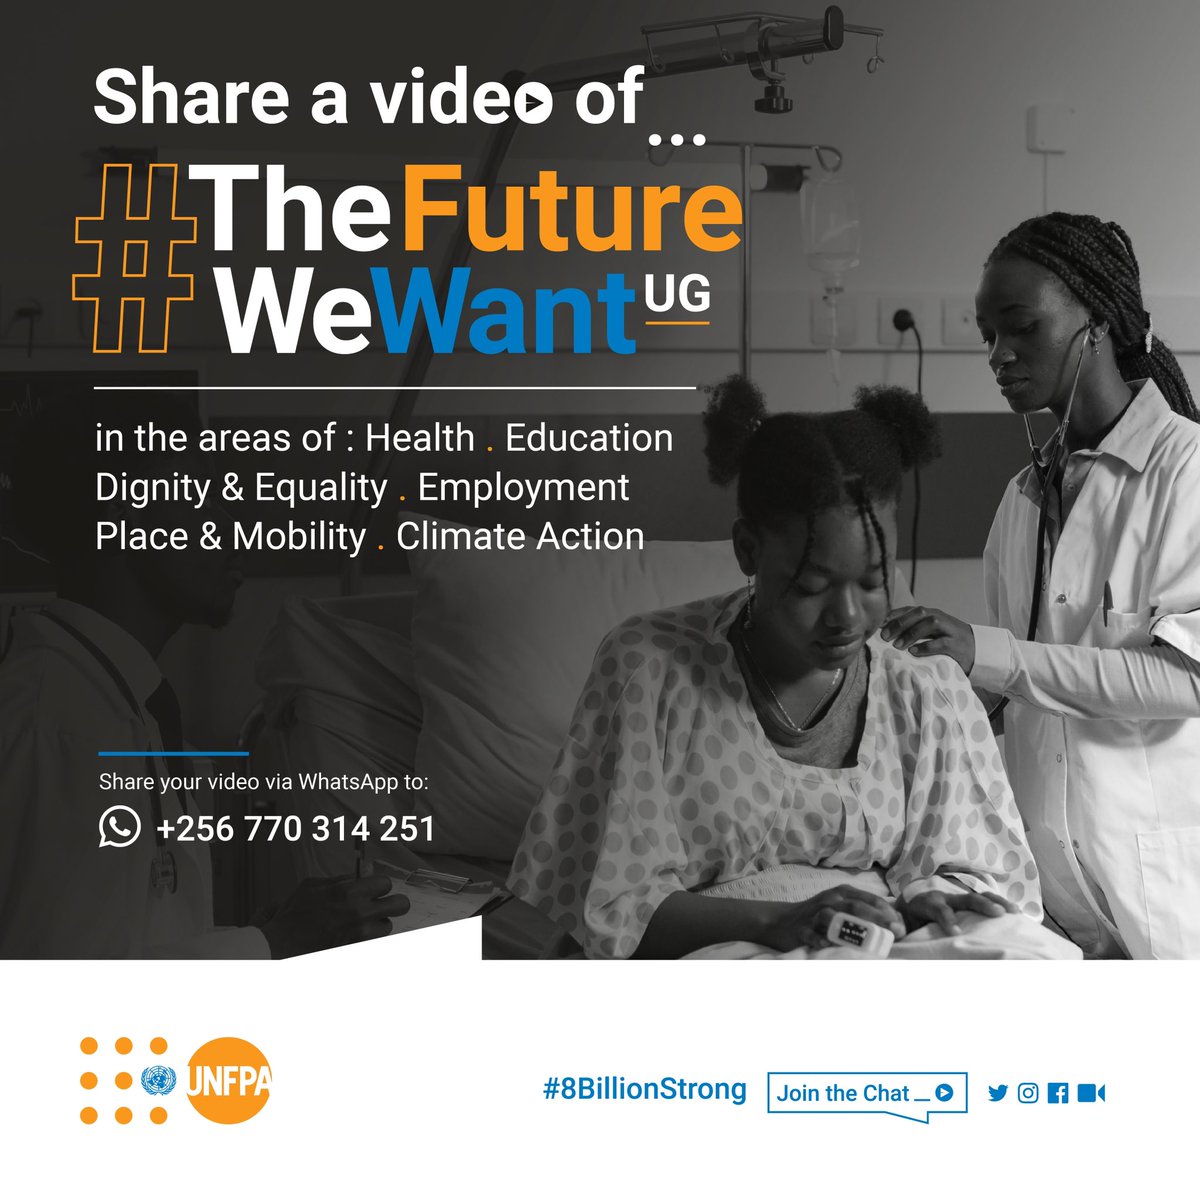 SPONSORED: Your opinion matters! Share a video of #TheFutureWeWantUG in the areas of Health, Education, Dignity & Equality .Employment, Place & Mobility, Climate Action  
Send your video to WhatsApp +256 770 314 251
Join the conversation 
#TheFutureWeWantUG 
#8BillionStrong